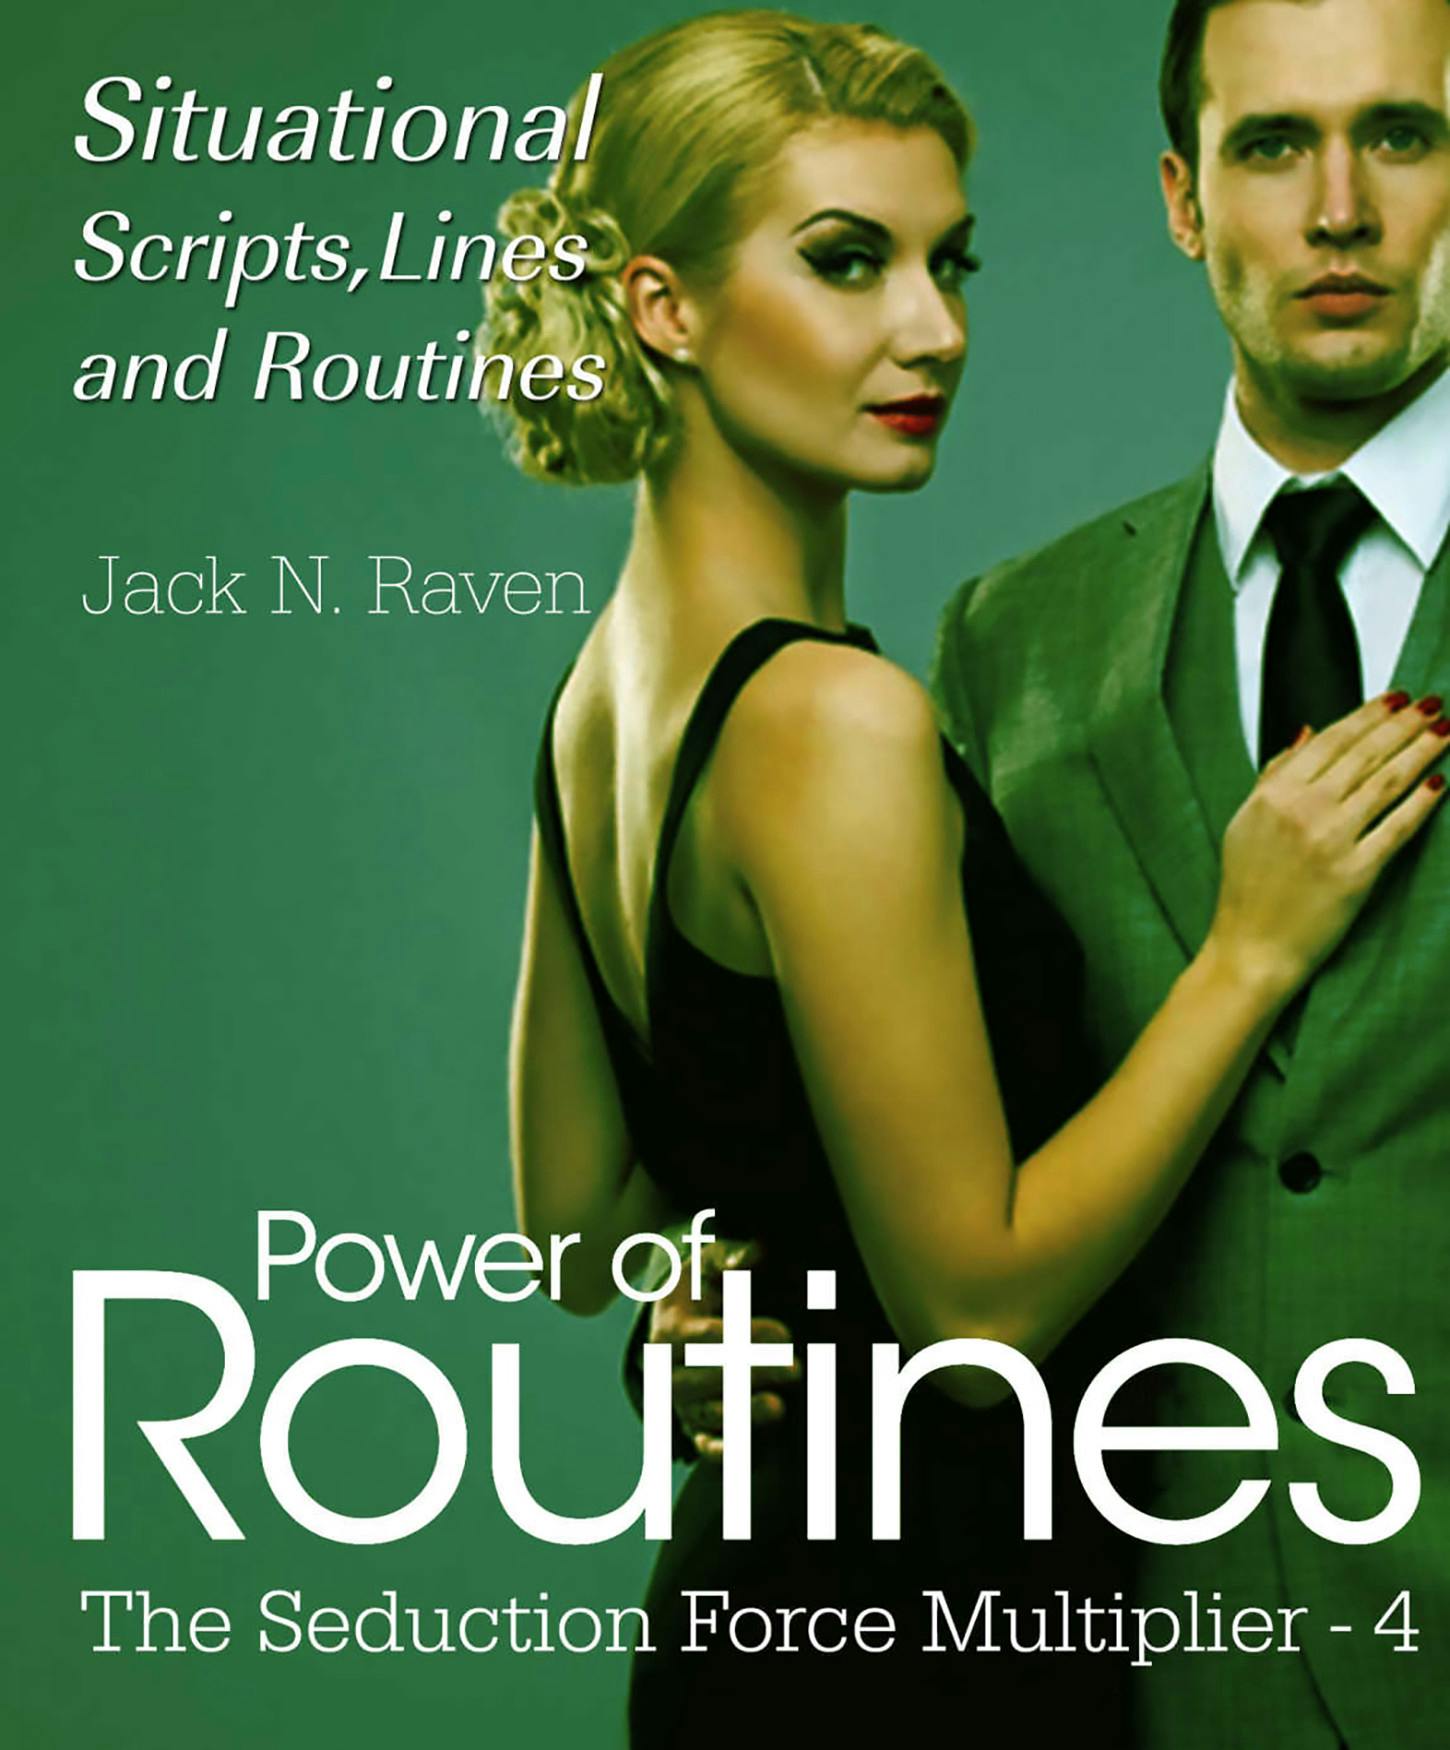 Seduction Force Multiplier 4: Power of Routines - Situational Scripts, Lines and Routines - Jack N. Raven